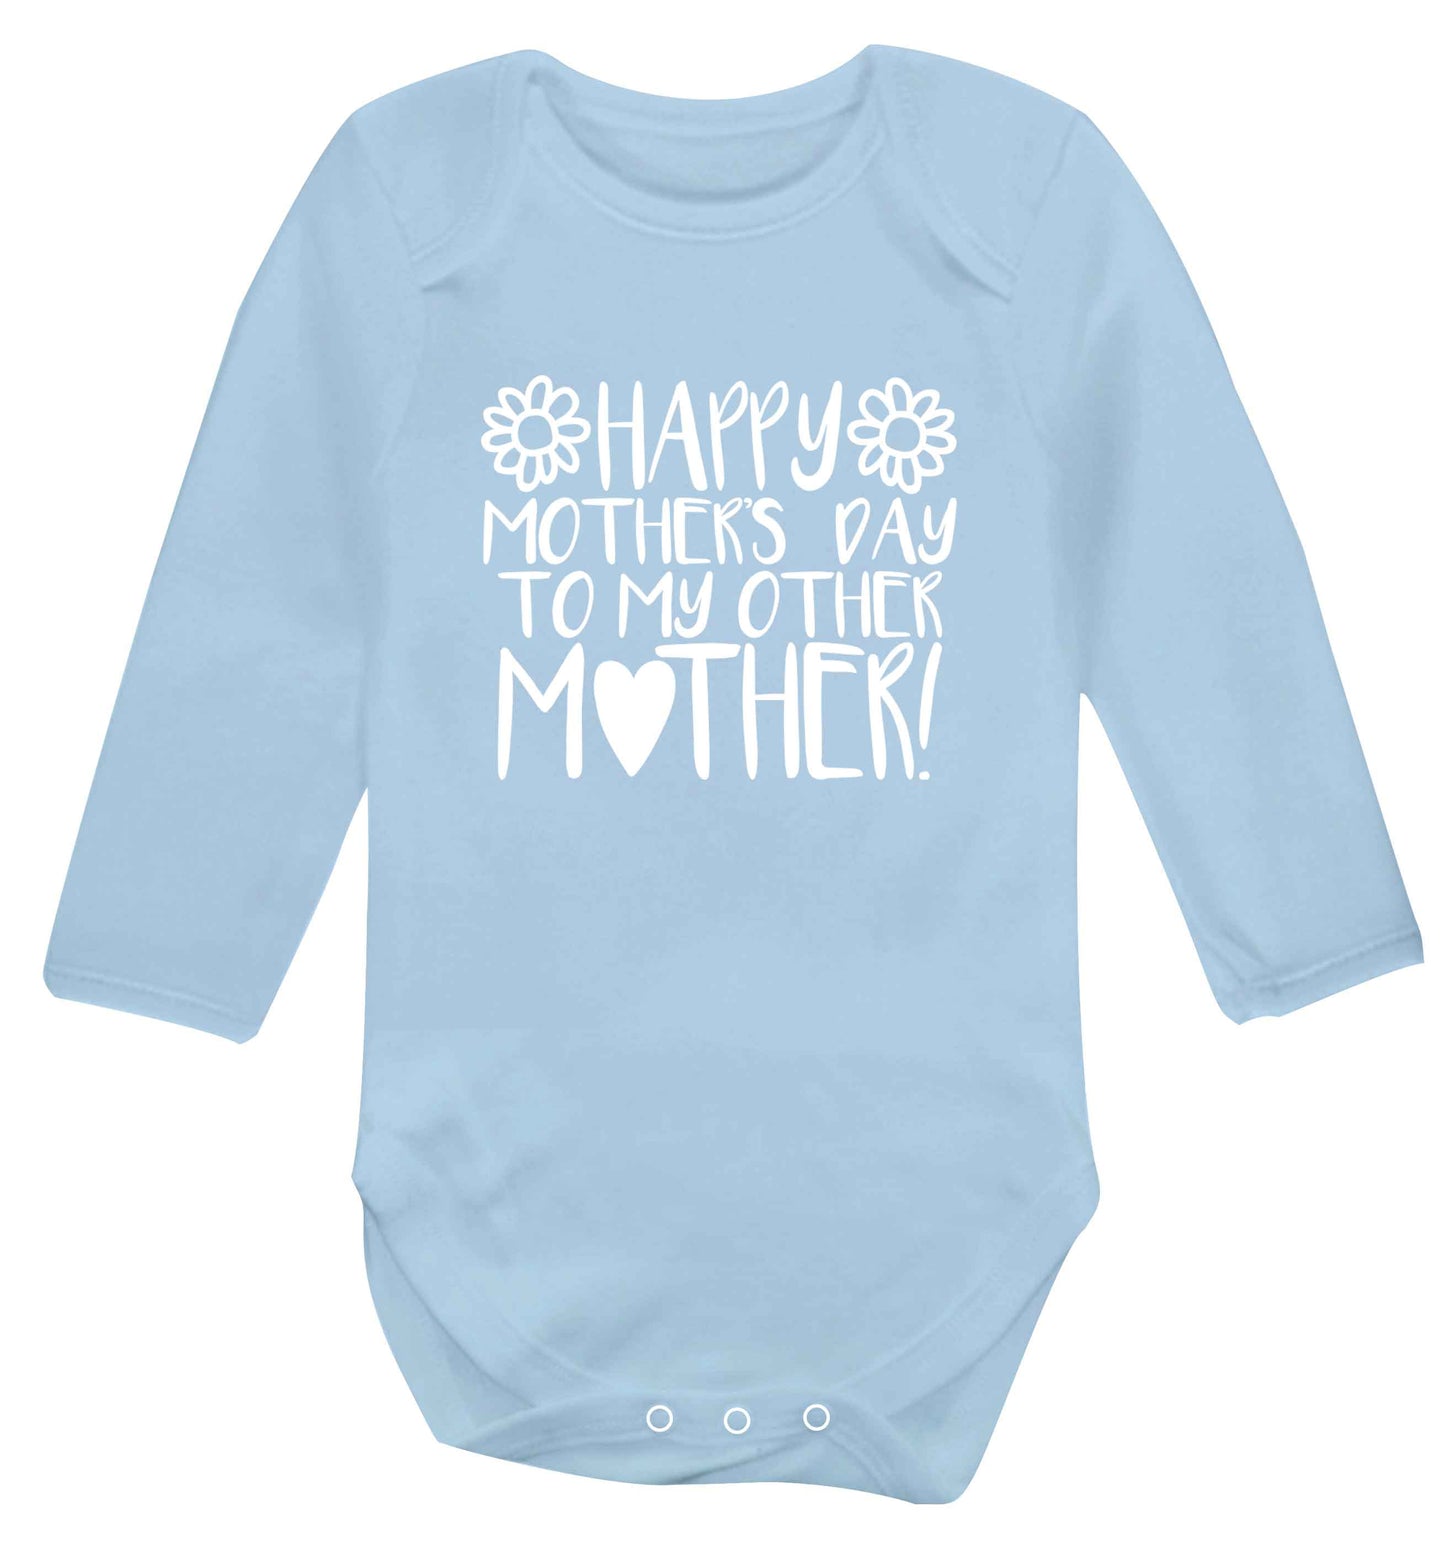 Happy mother's day to my other mother baby vest long sleeved pale blue 6-12 months